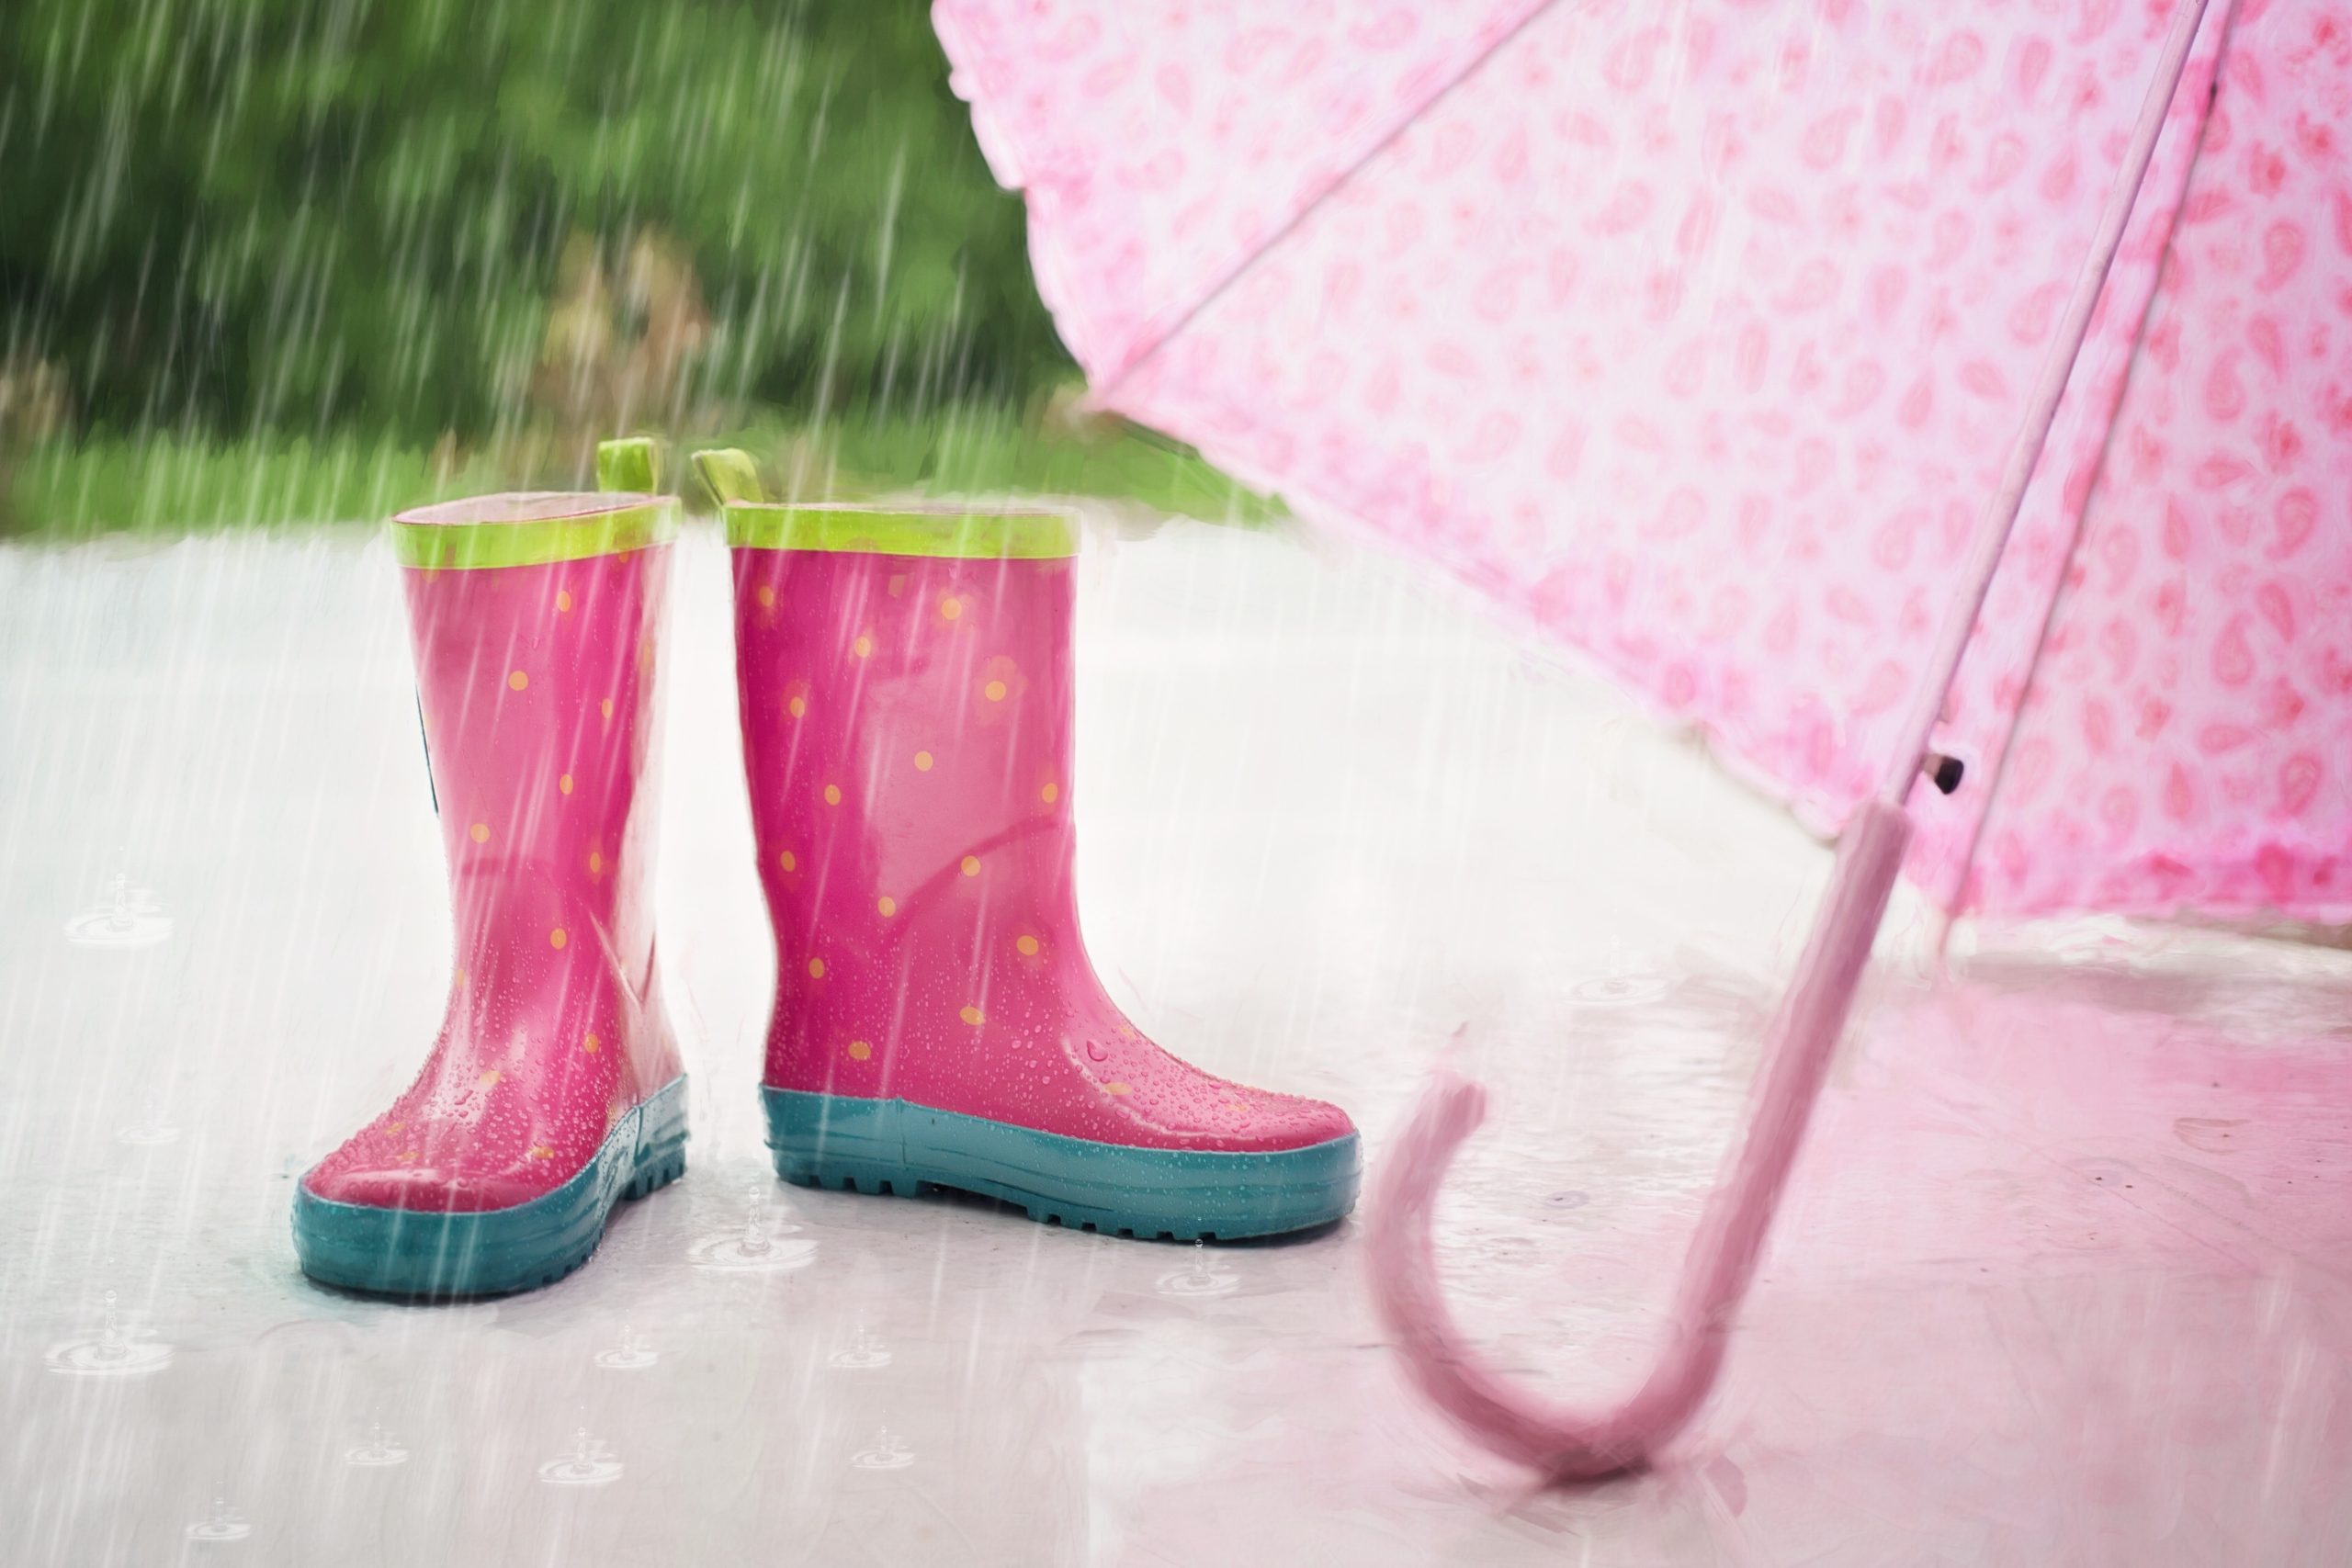 a pair of pink rainboots next to a pink umbrella. Rain is falling in the background. This image represents spring time. 